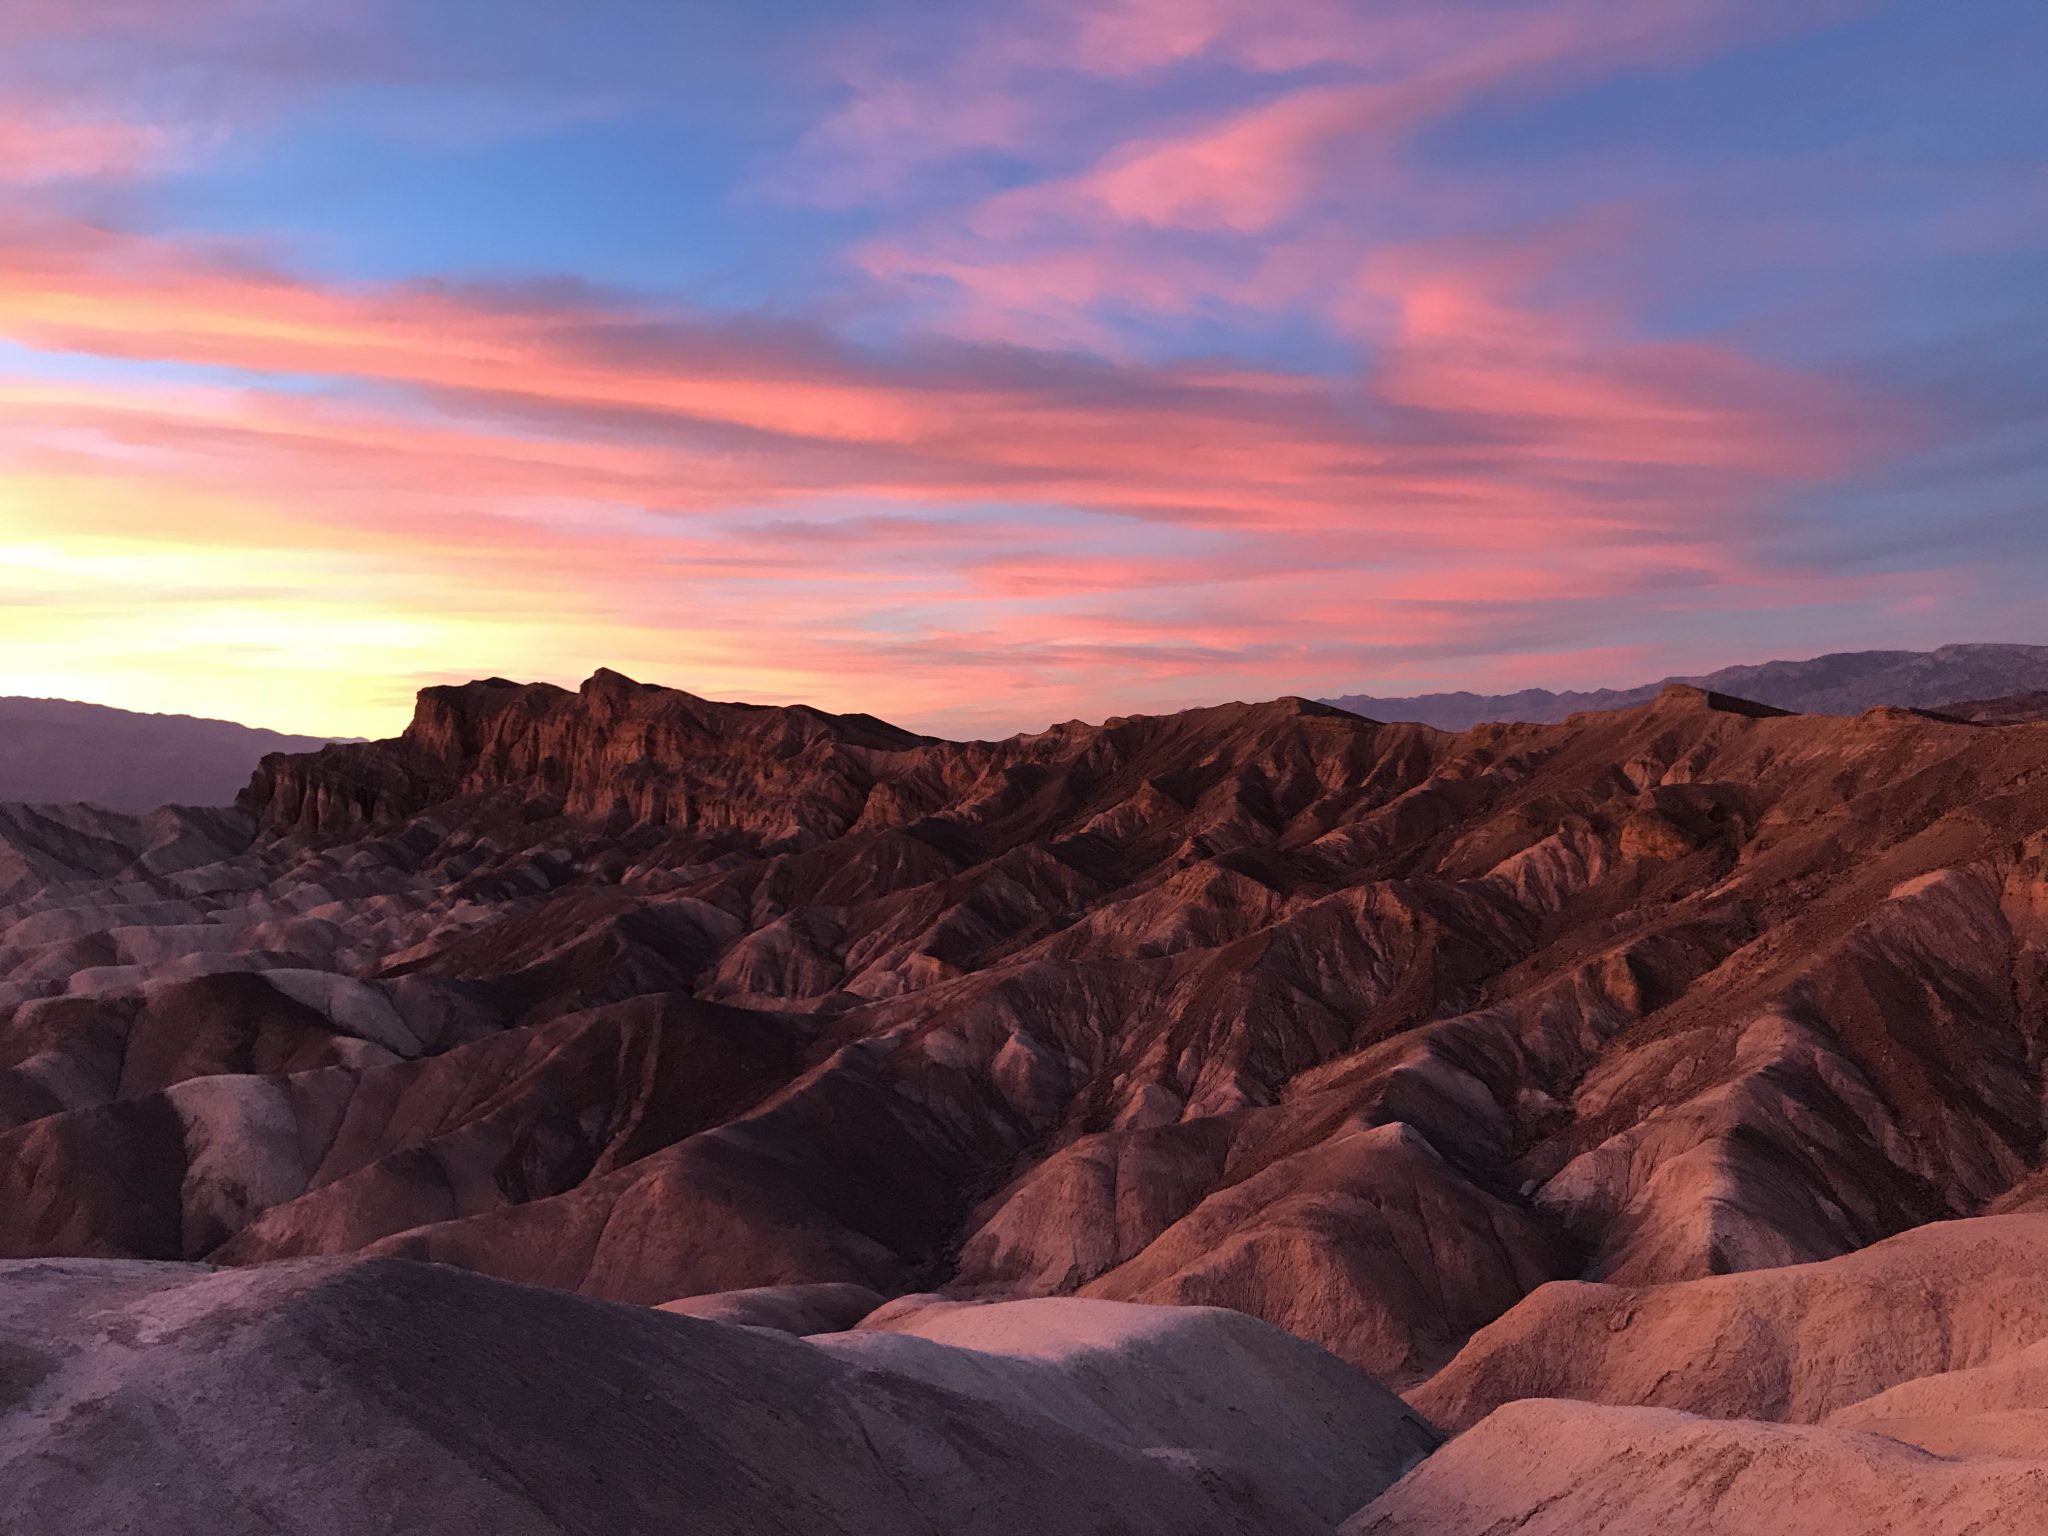 Sunset In Death Valley, California